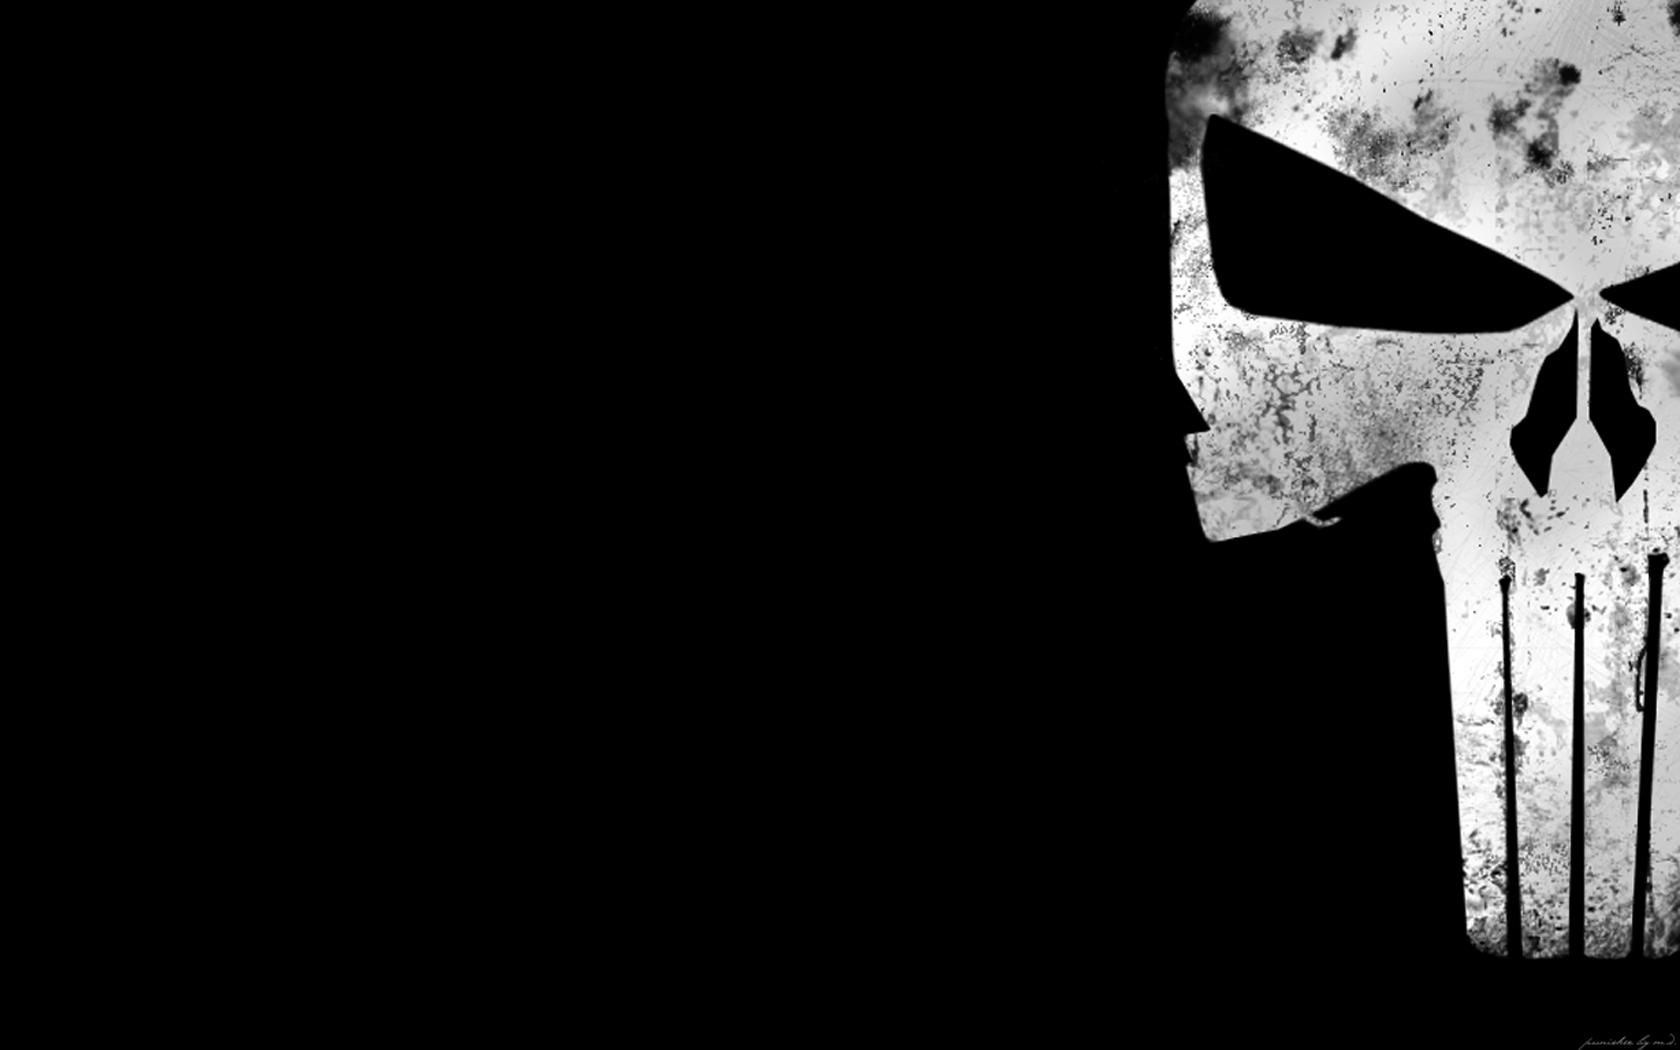 Punisher Flag Wallpapers